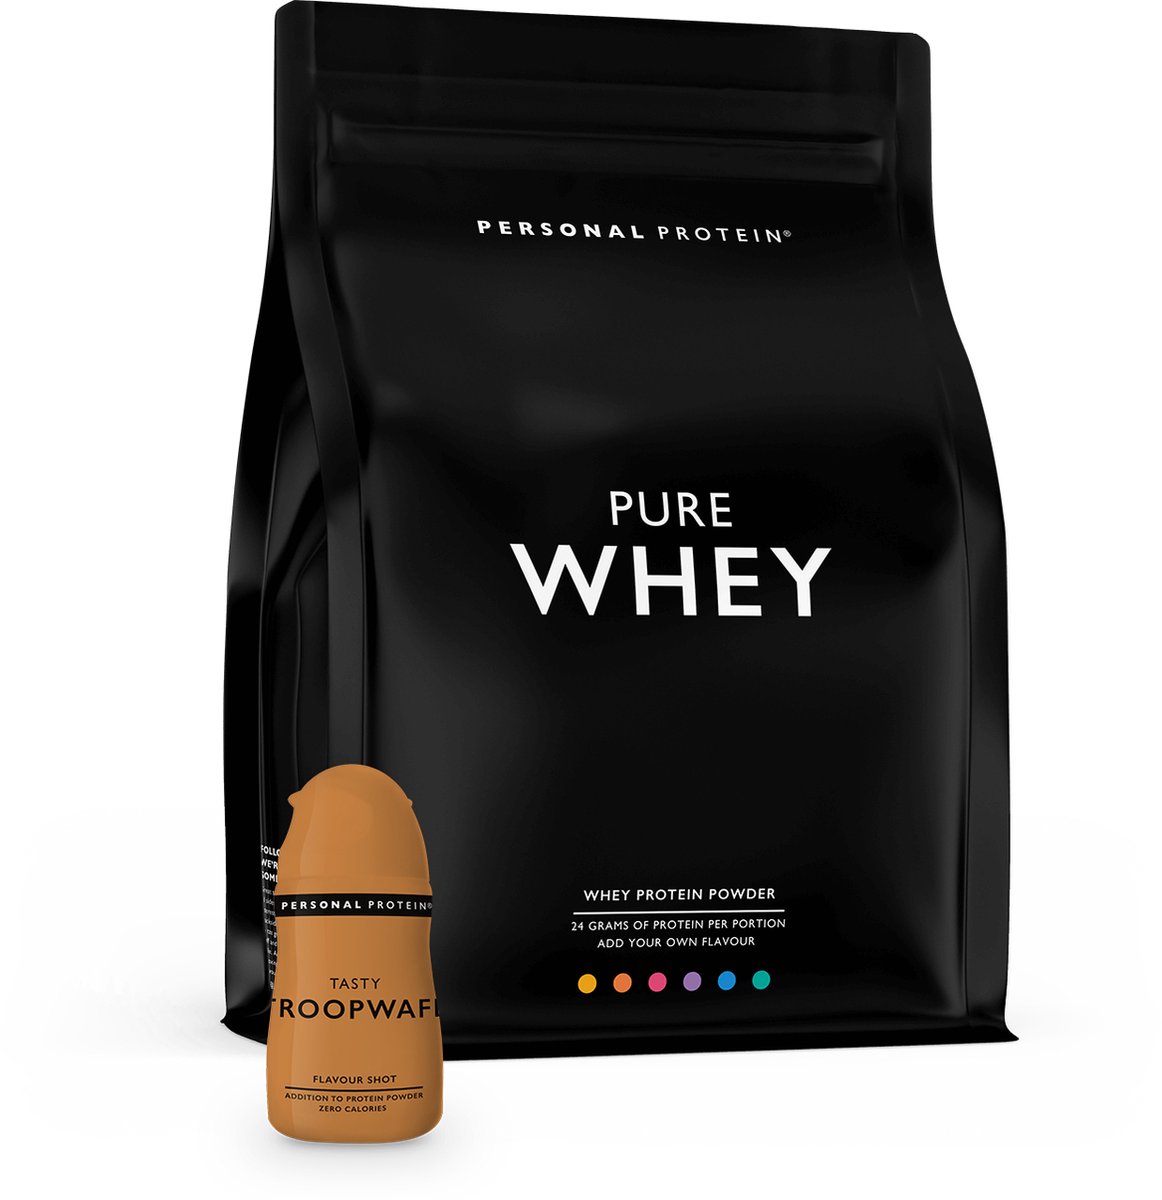 Personal Protein® – Pure Whey Protein – Stroopwafel Eiwitshake / Protein shake – 1000 gram (33 shakes) + Stroopwafel Flavour Shot